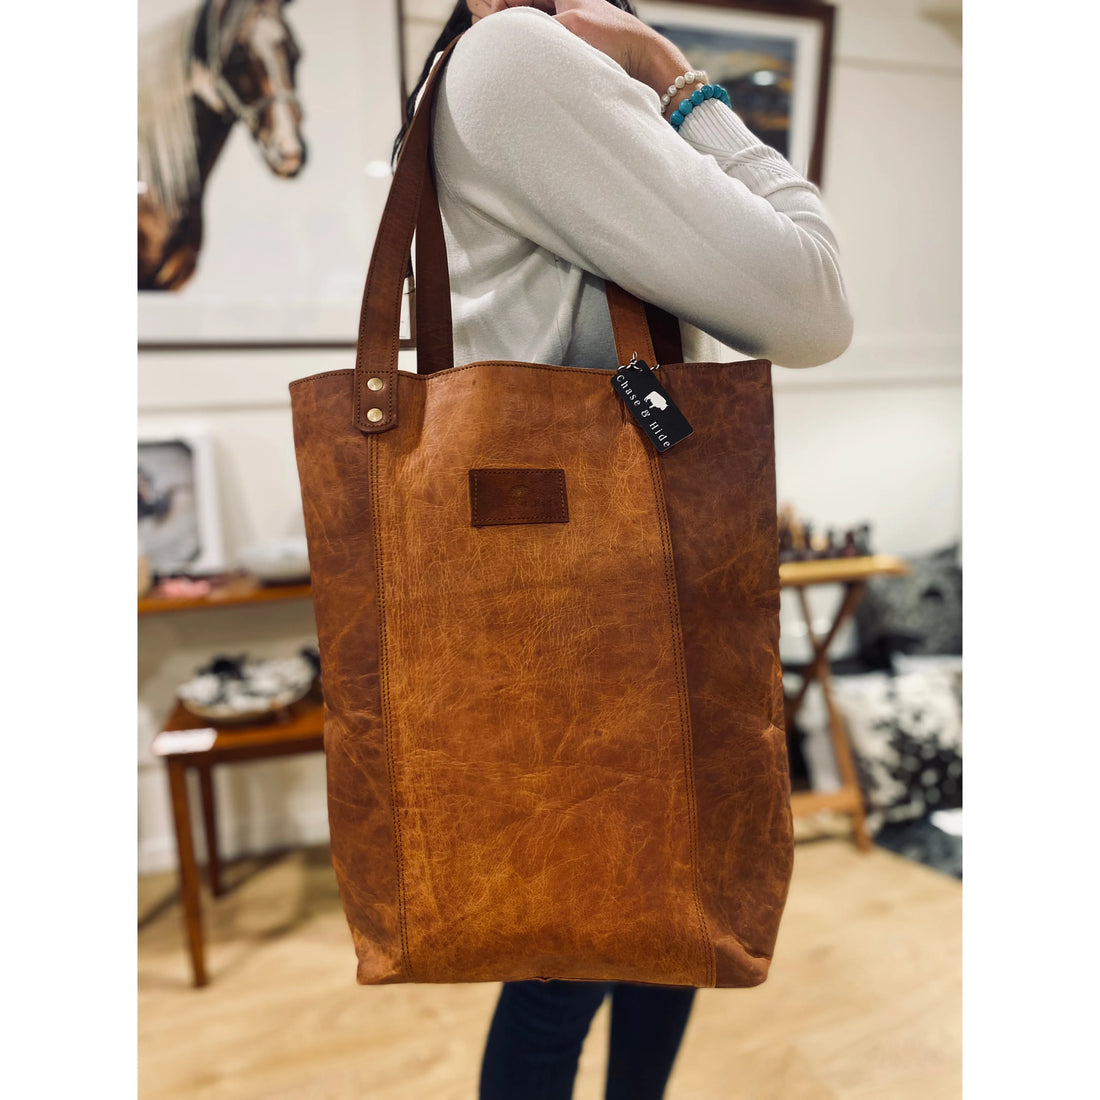 Texas leather tote